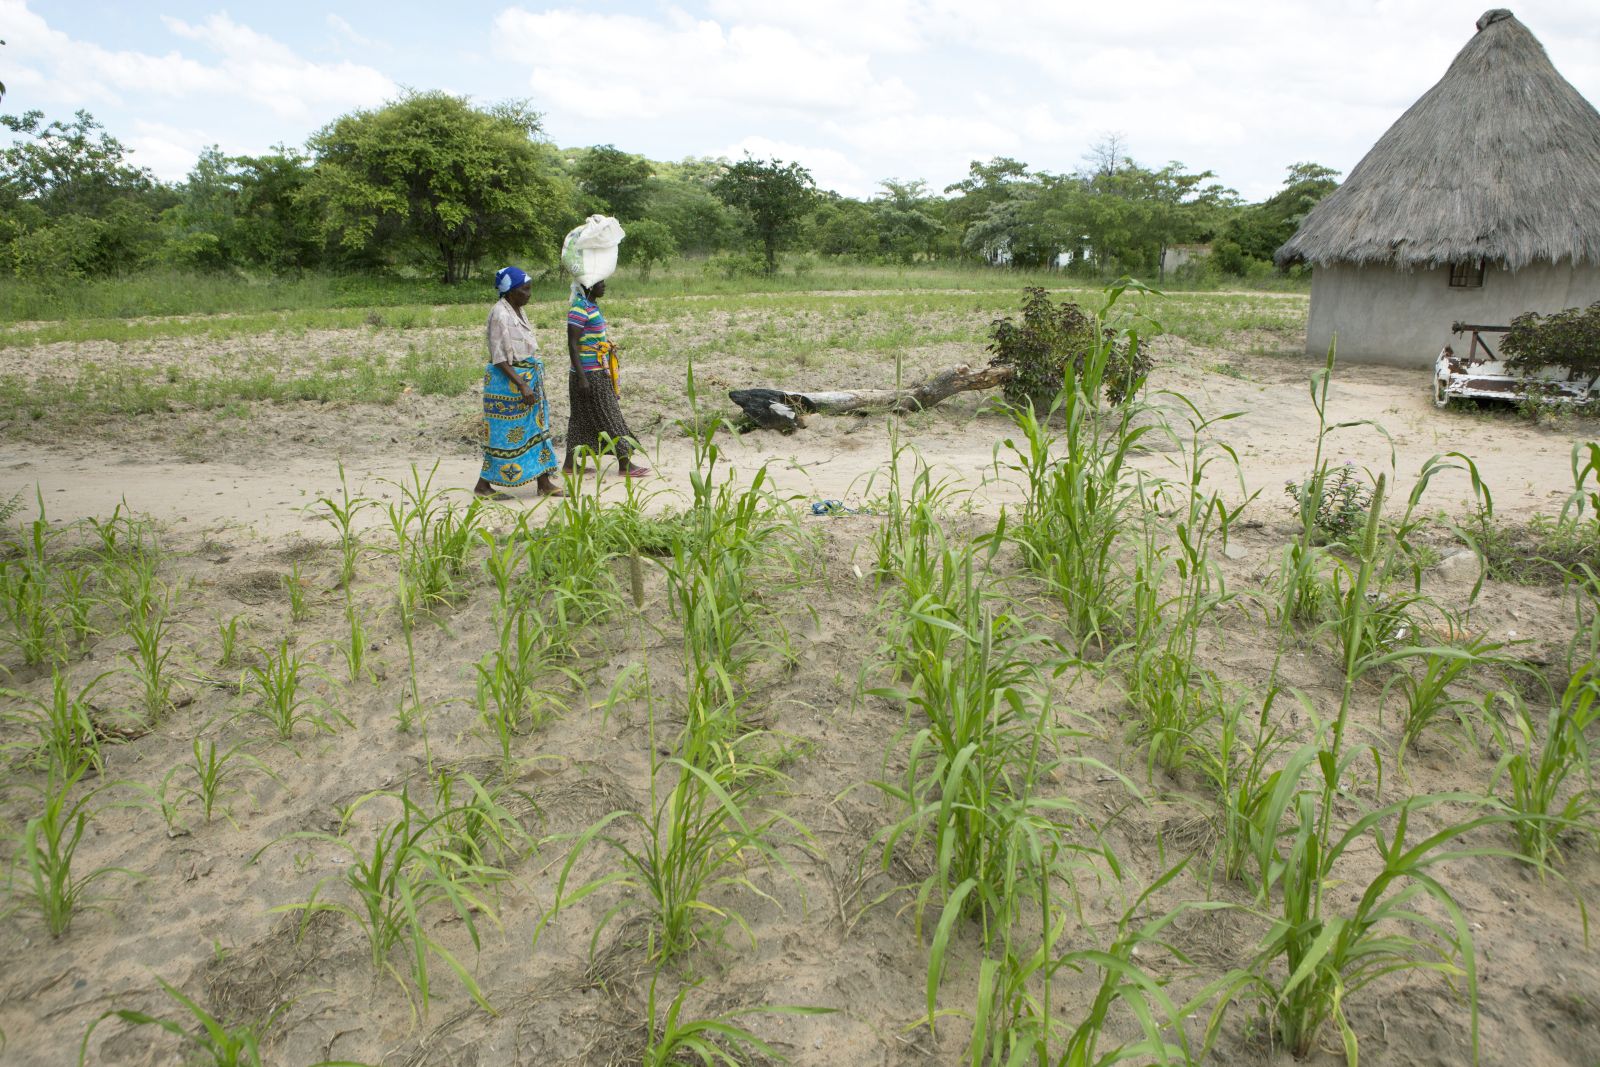 Zimbabwe is suffering the third year of drought in a row.